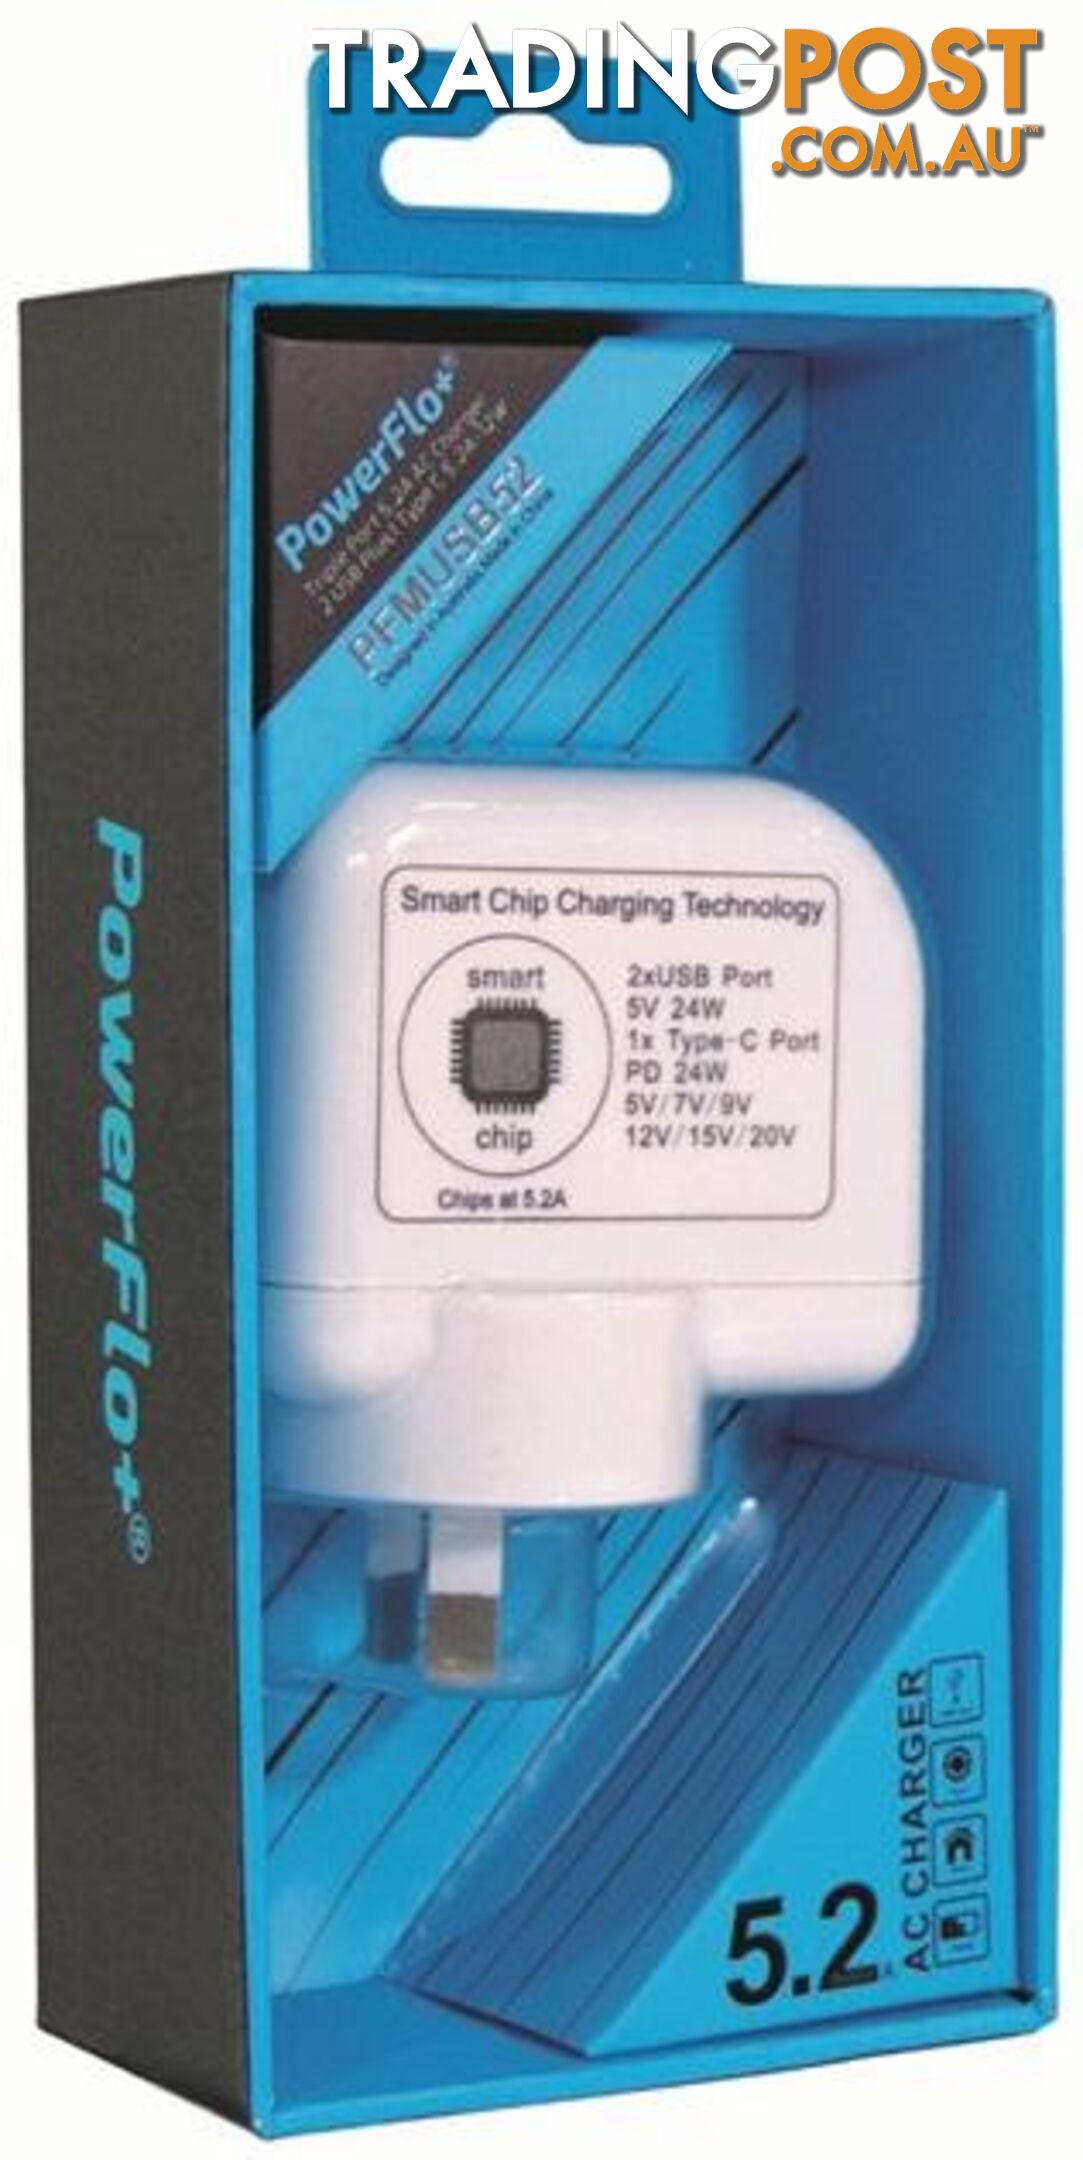 Powerflo+ Multiport AC Chargers - 8E352F - Charging & Power